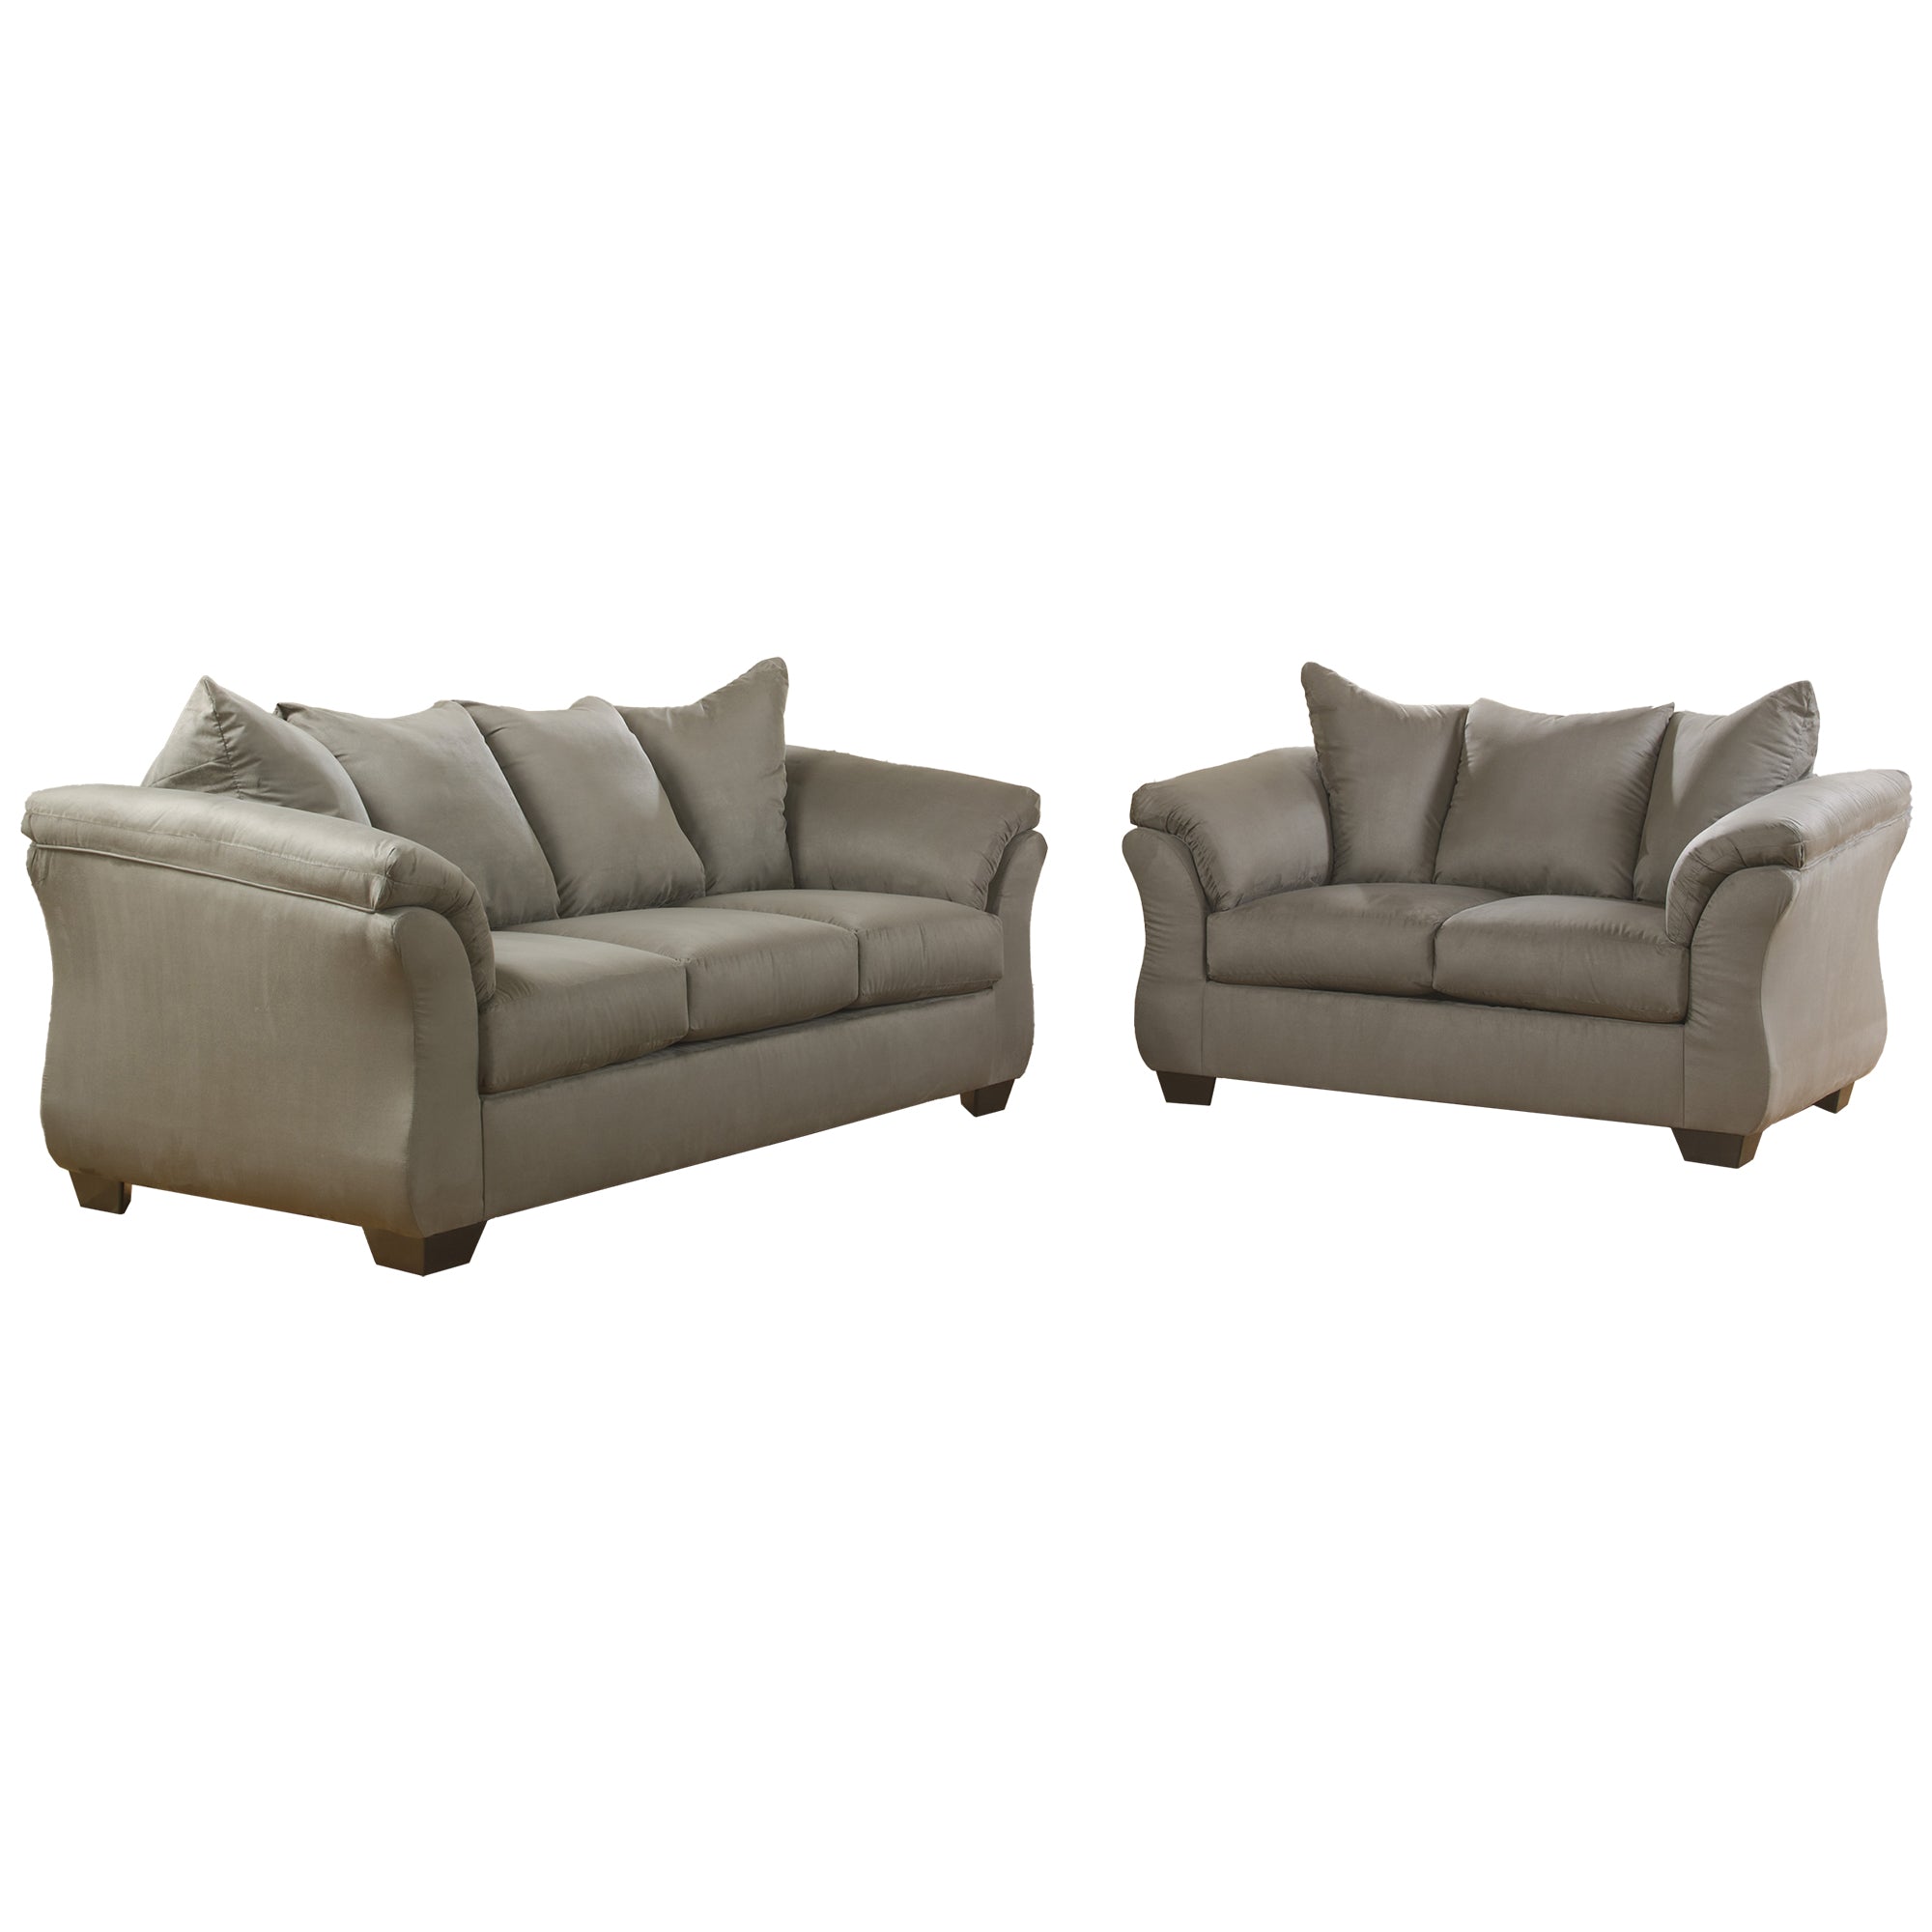 Darcy Sofa and Loveseat